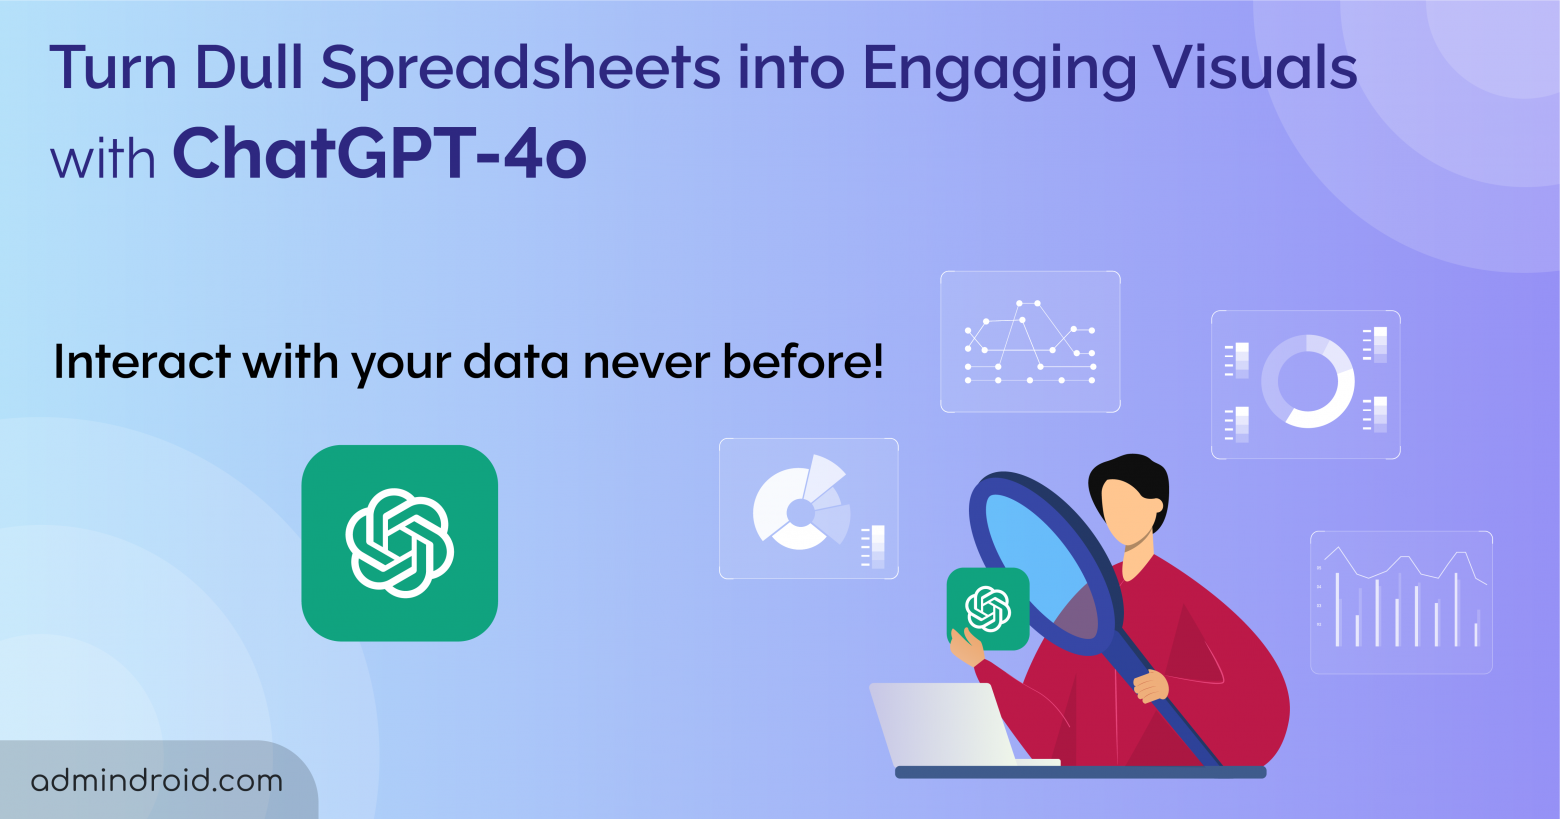 Turn Dull Spreadsheets into Engaging Visuals with ChatGPT-4o 